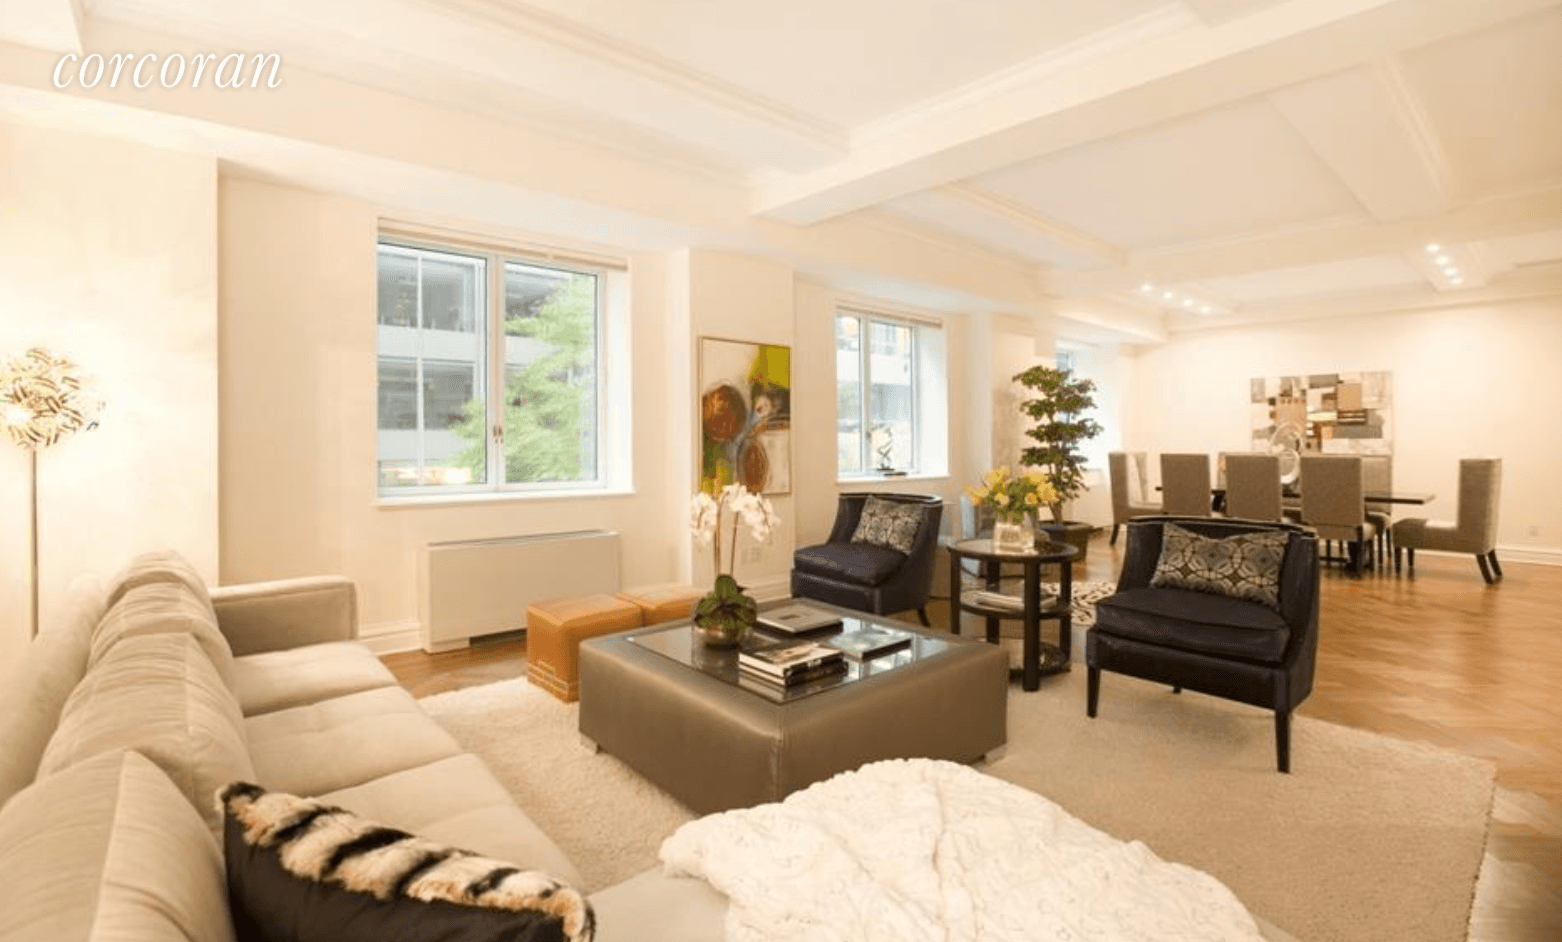 The epitome of elegance, this stylish 4 bedroom, 6 and a half bath condominium with a huge terrace in the sought after 502 Avenue was designed for luxurious comfort.